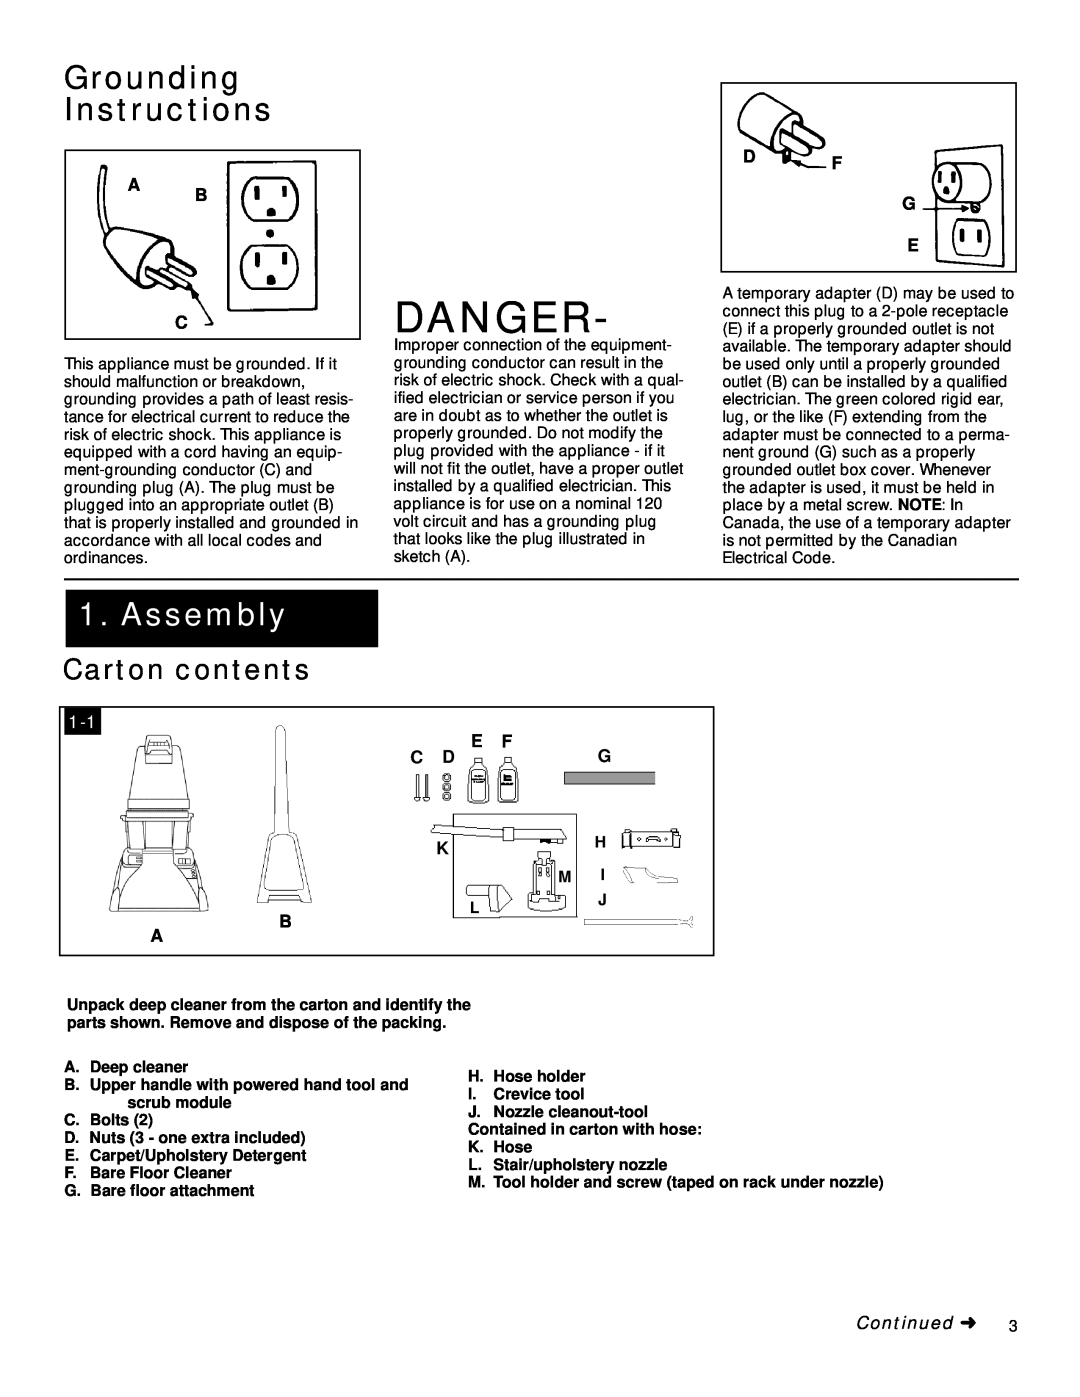 Hoover SpinScrub manual Danger, Grounding Instructions, Assembly, Carton contents, A B C, D F G E, E F C Dg Kh, Continued 